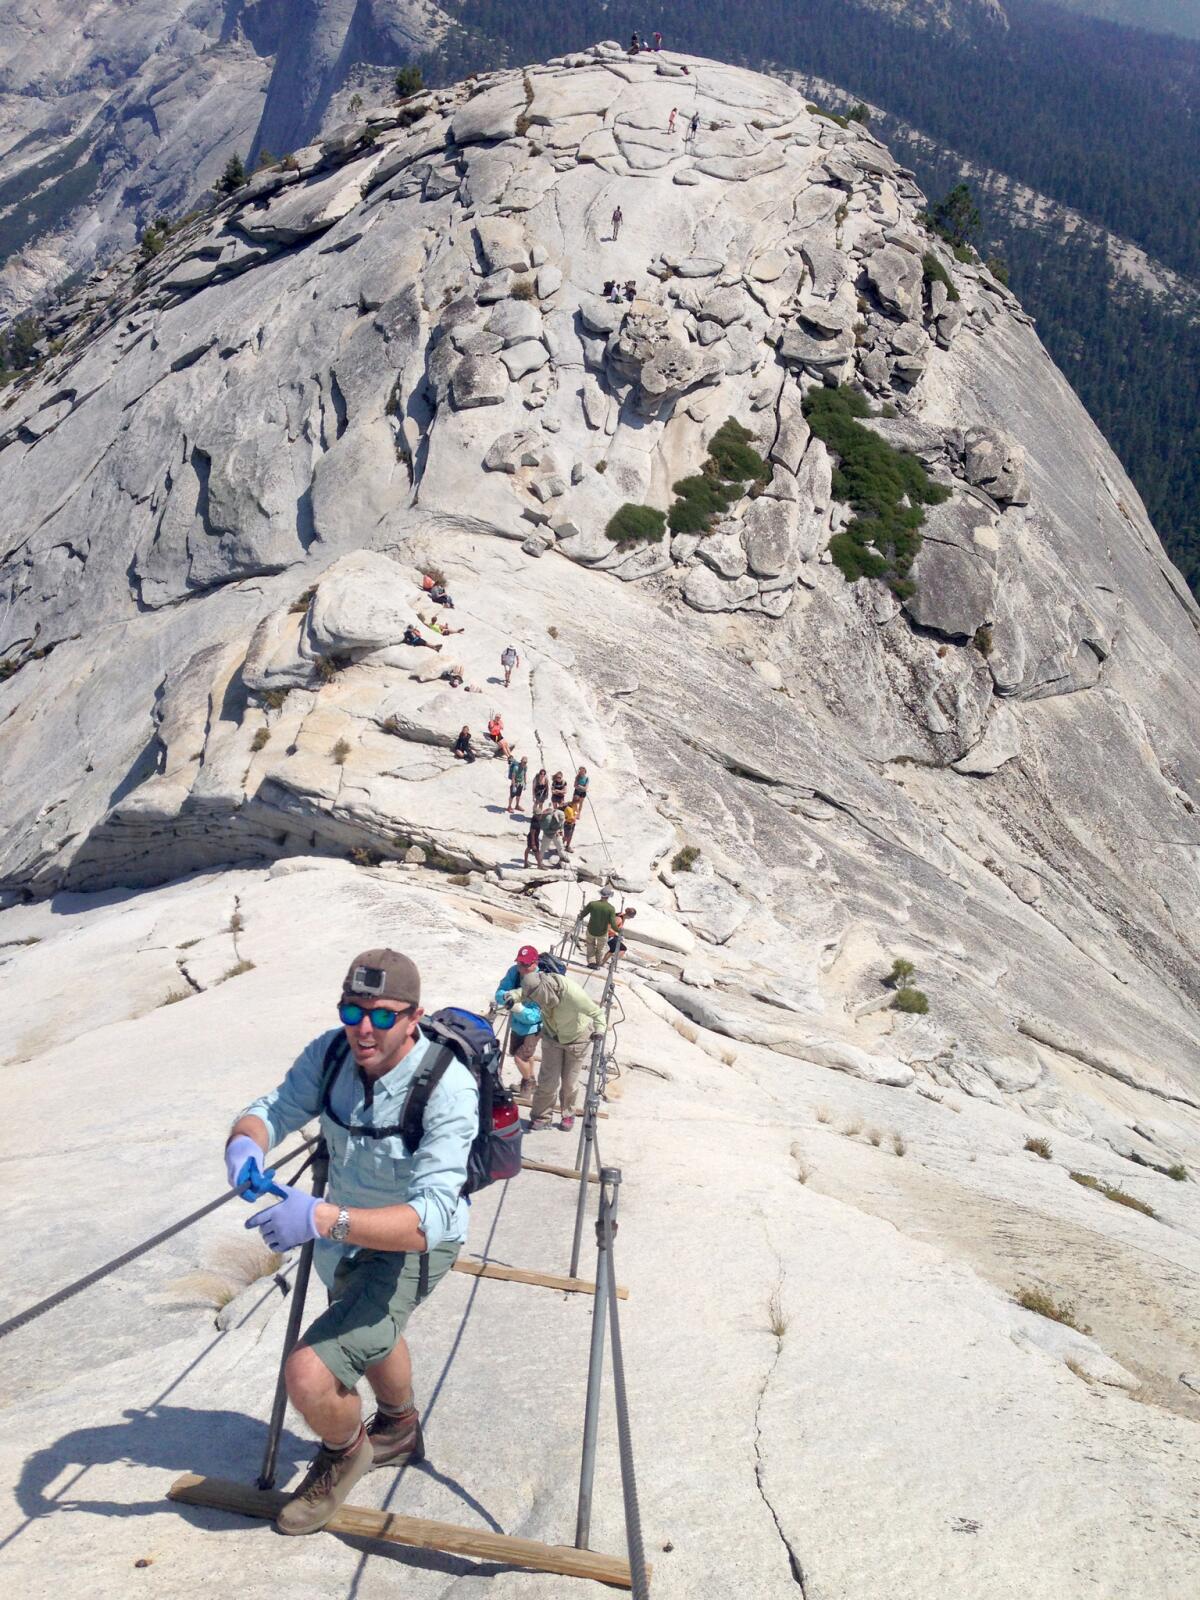 Every hiker on the Half Dome Trail in spring and summer must have a permit.